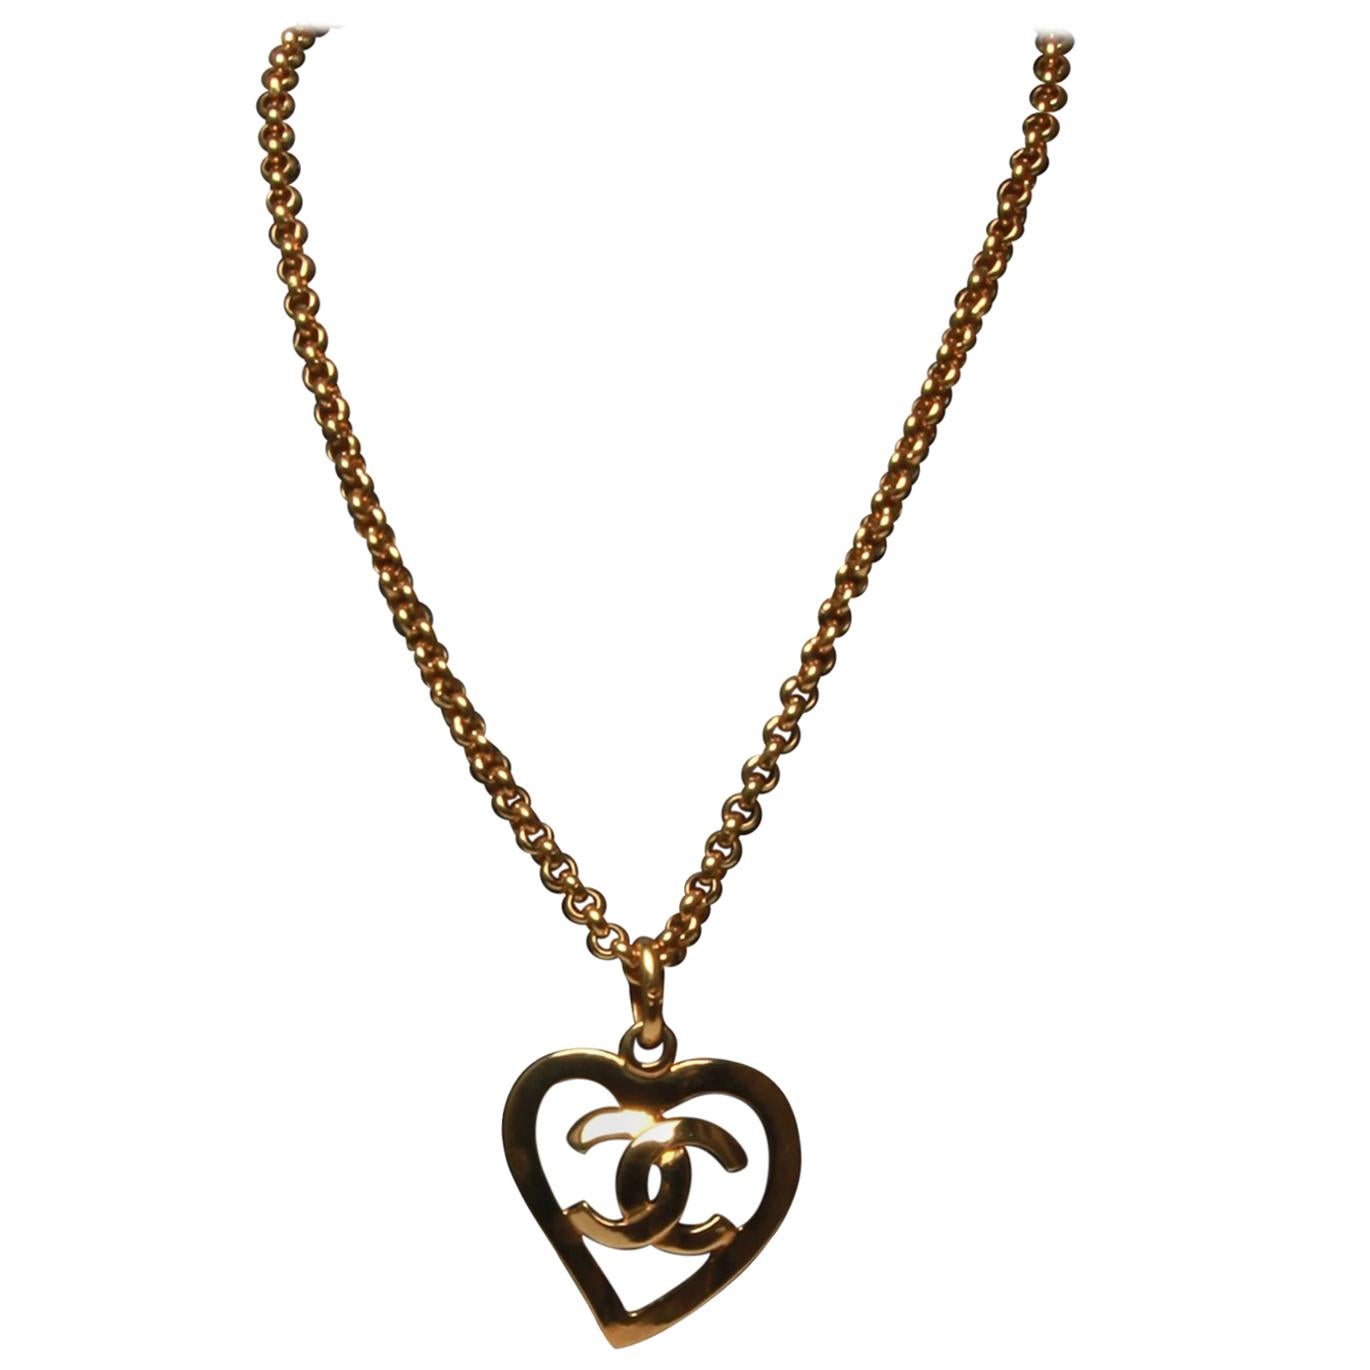 Chanel heart shaped pendant with CC logo